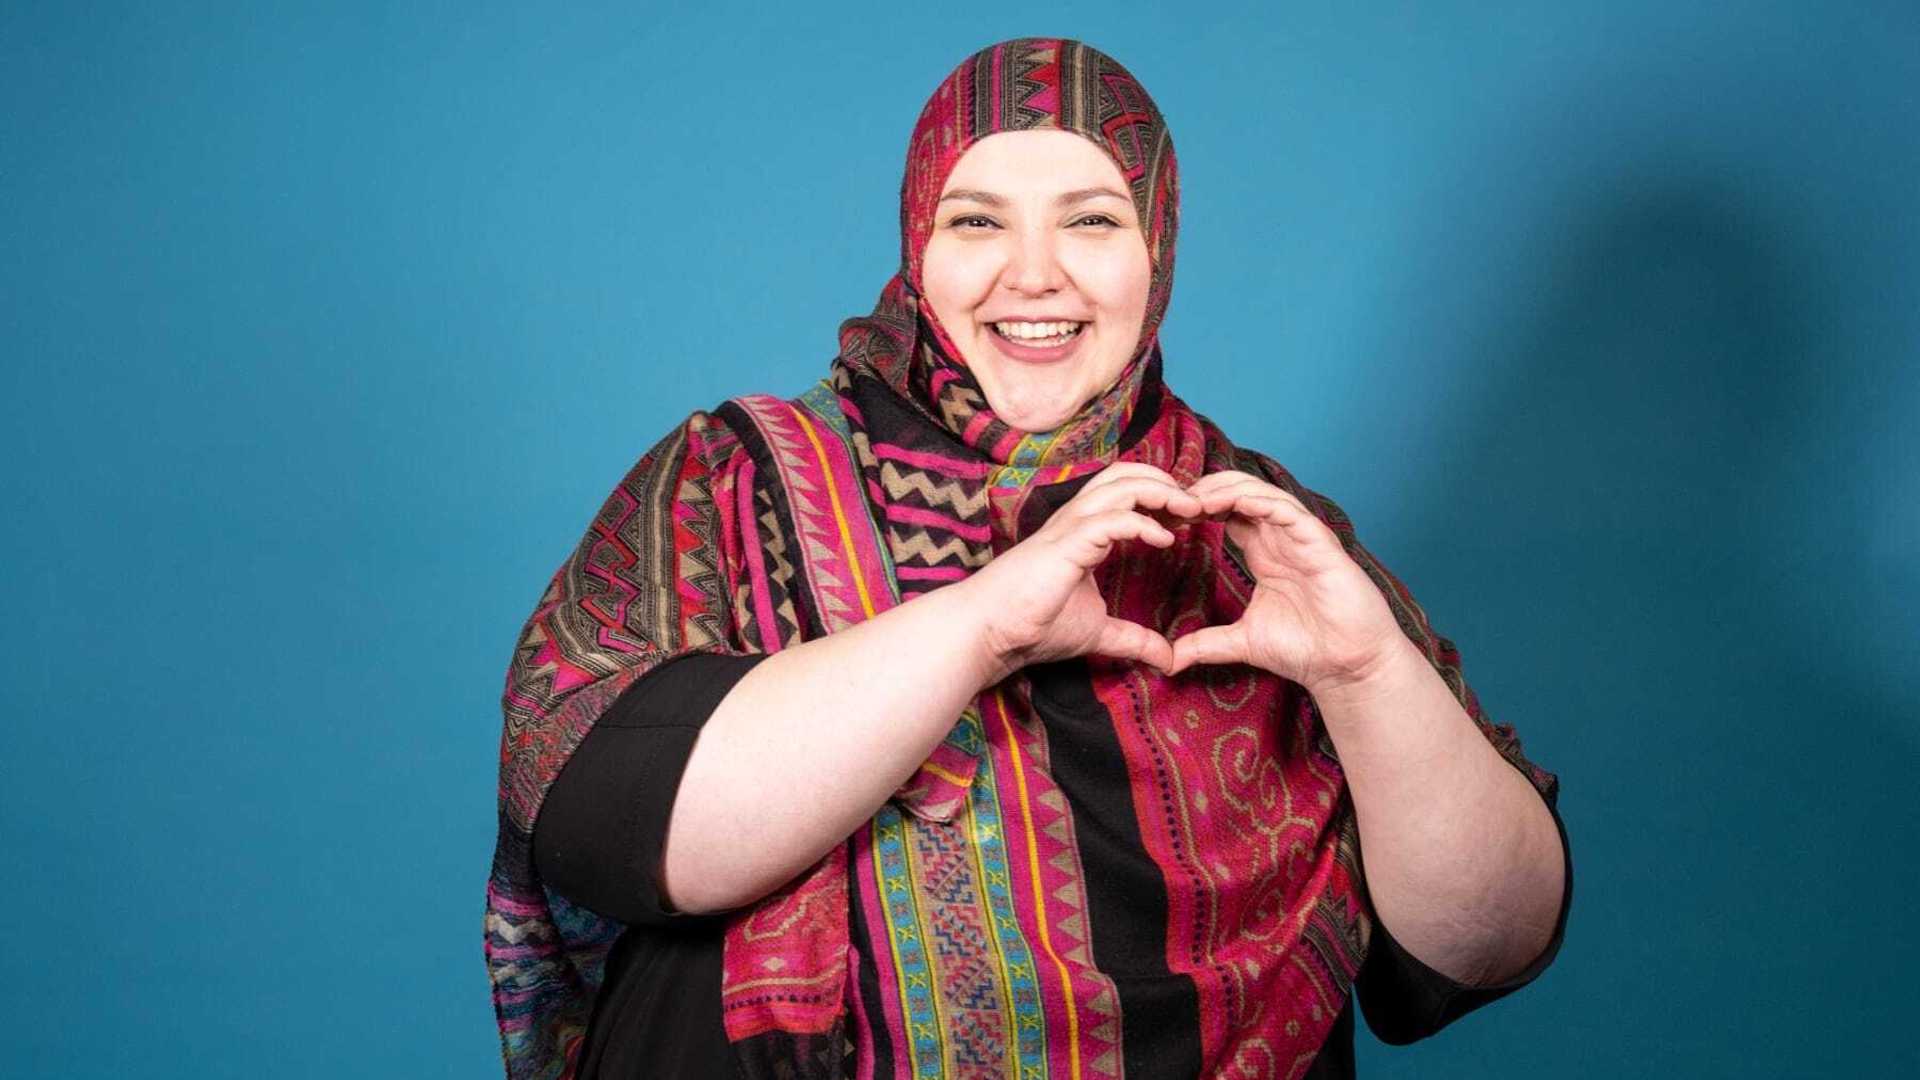 Fatiha El-Ghorri is a comedian with No Direction Home, the London group helping refugees get in to comedy